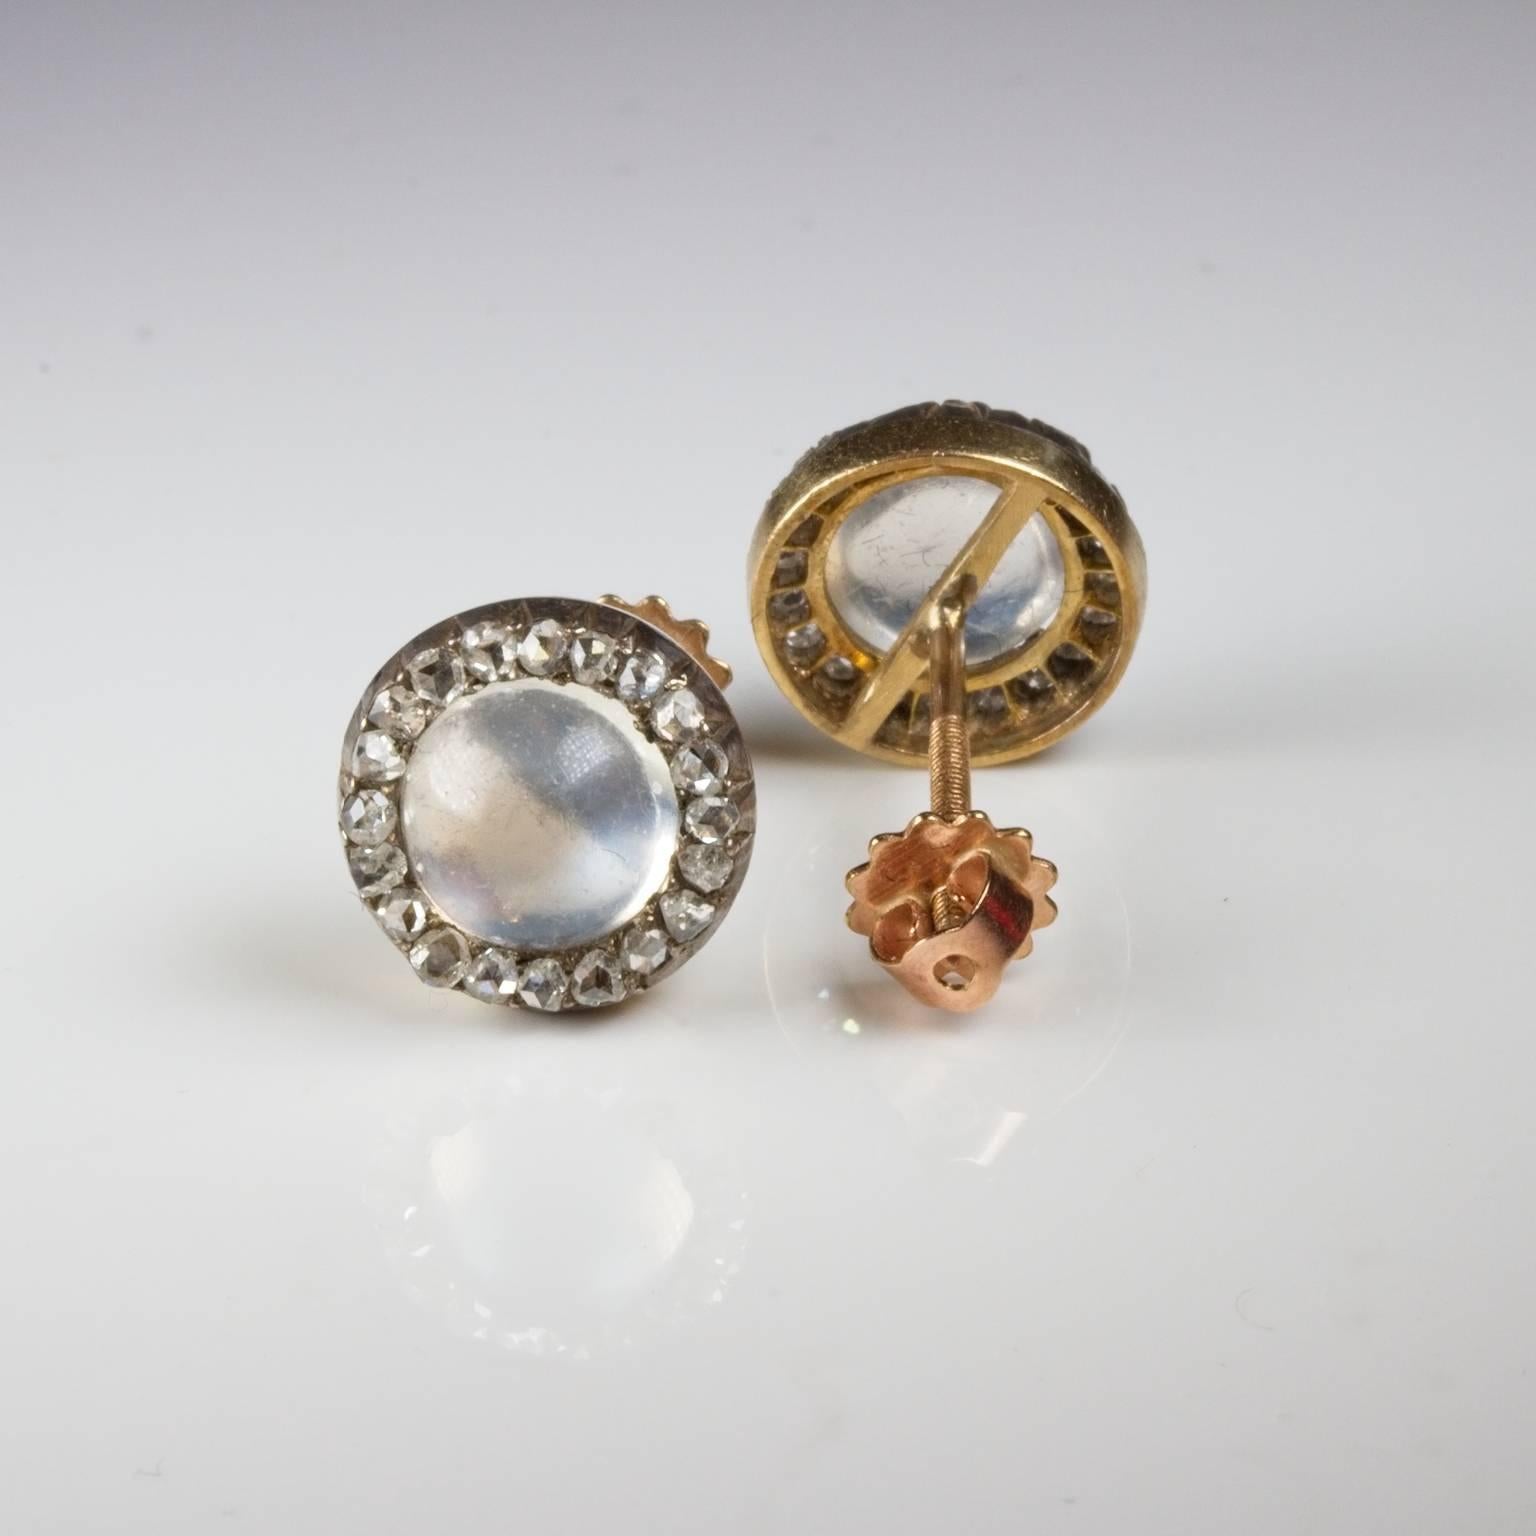 Pretty Victorian moonstone cluster stud earrings in 18ct gold each surrounded by 20 rose cut diamonds set in silver. 9ct gold screw posts and butterflies. Diameter approximately 7mm, depth 3mm - 3.5mm. This item is unique and once sold cannot be